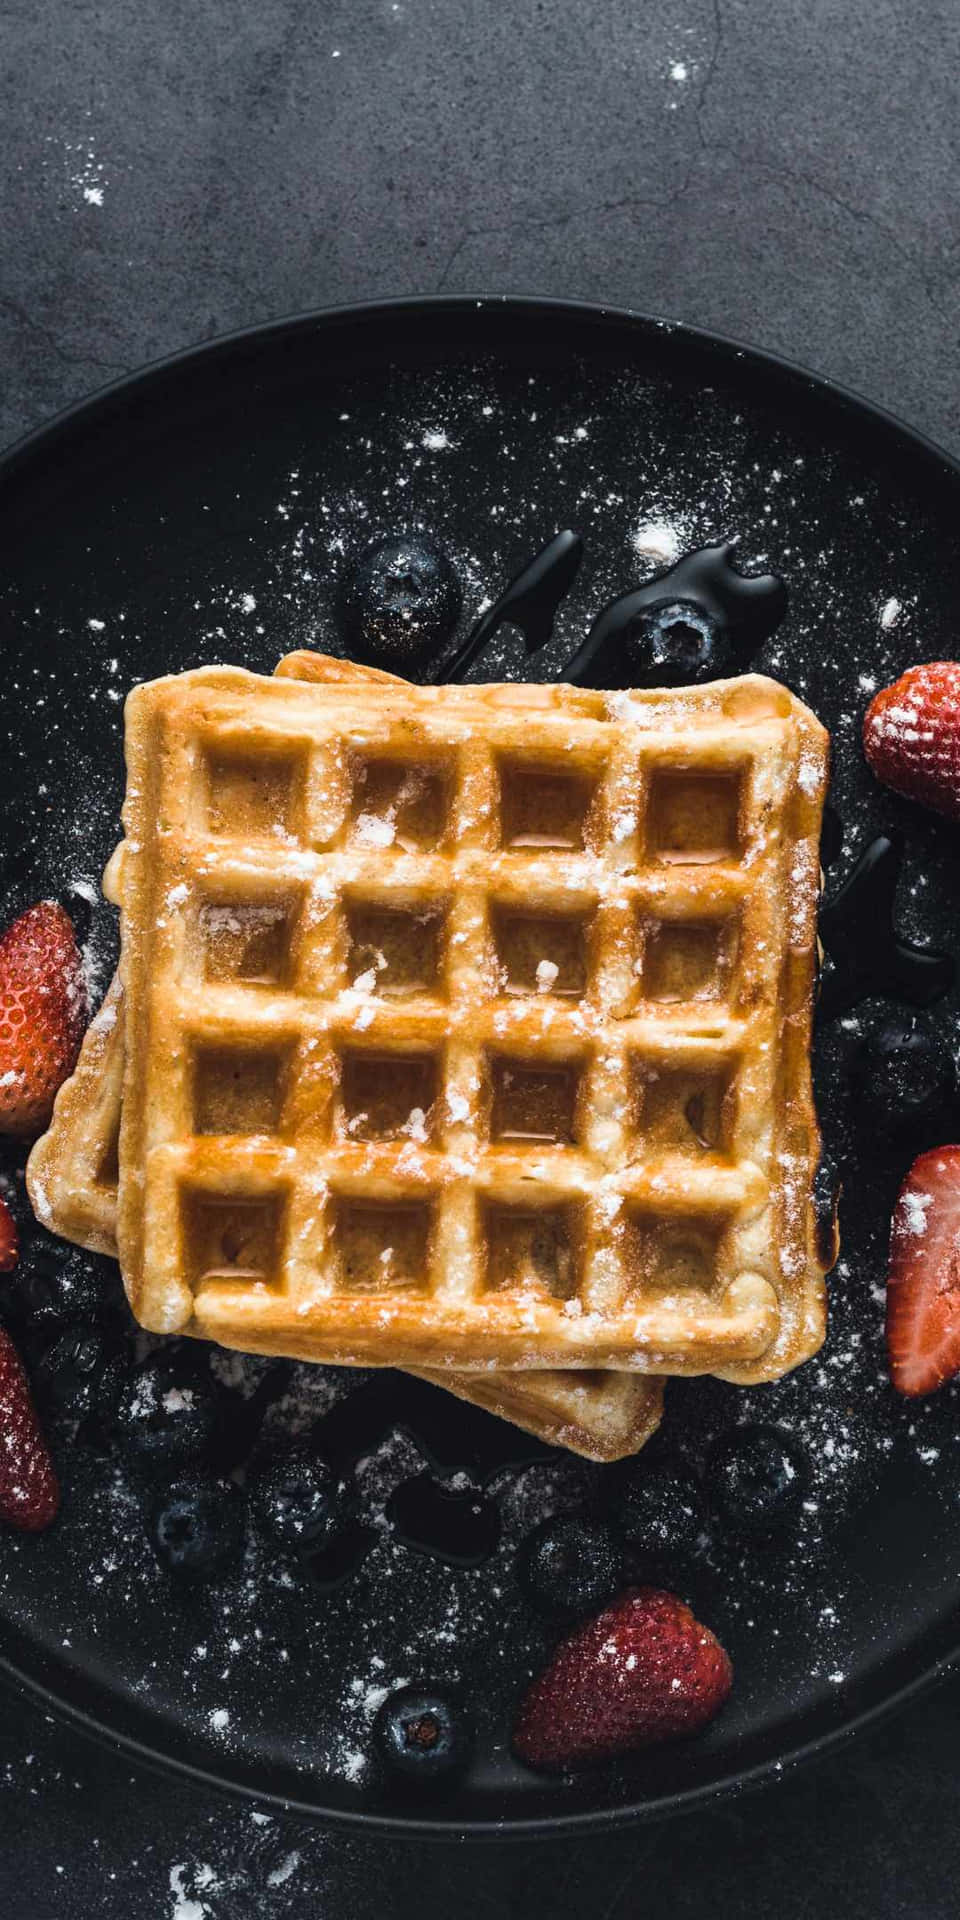 Pixel 3 Pastries Background Waffles